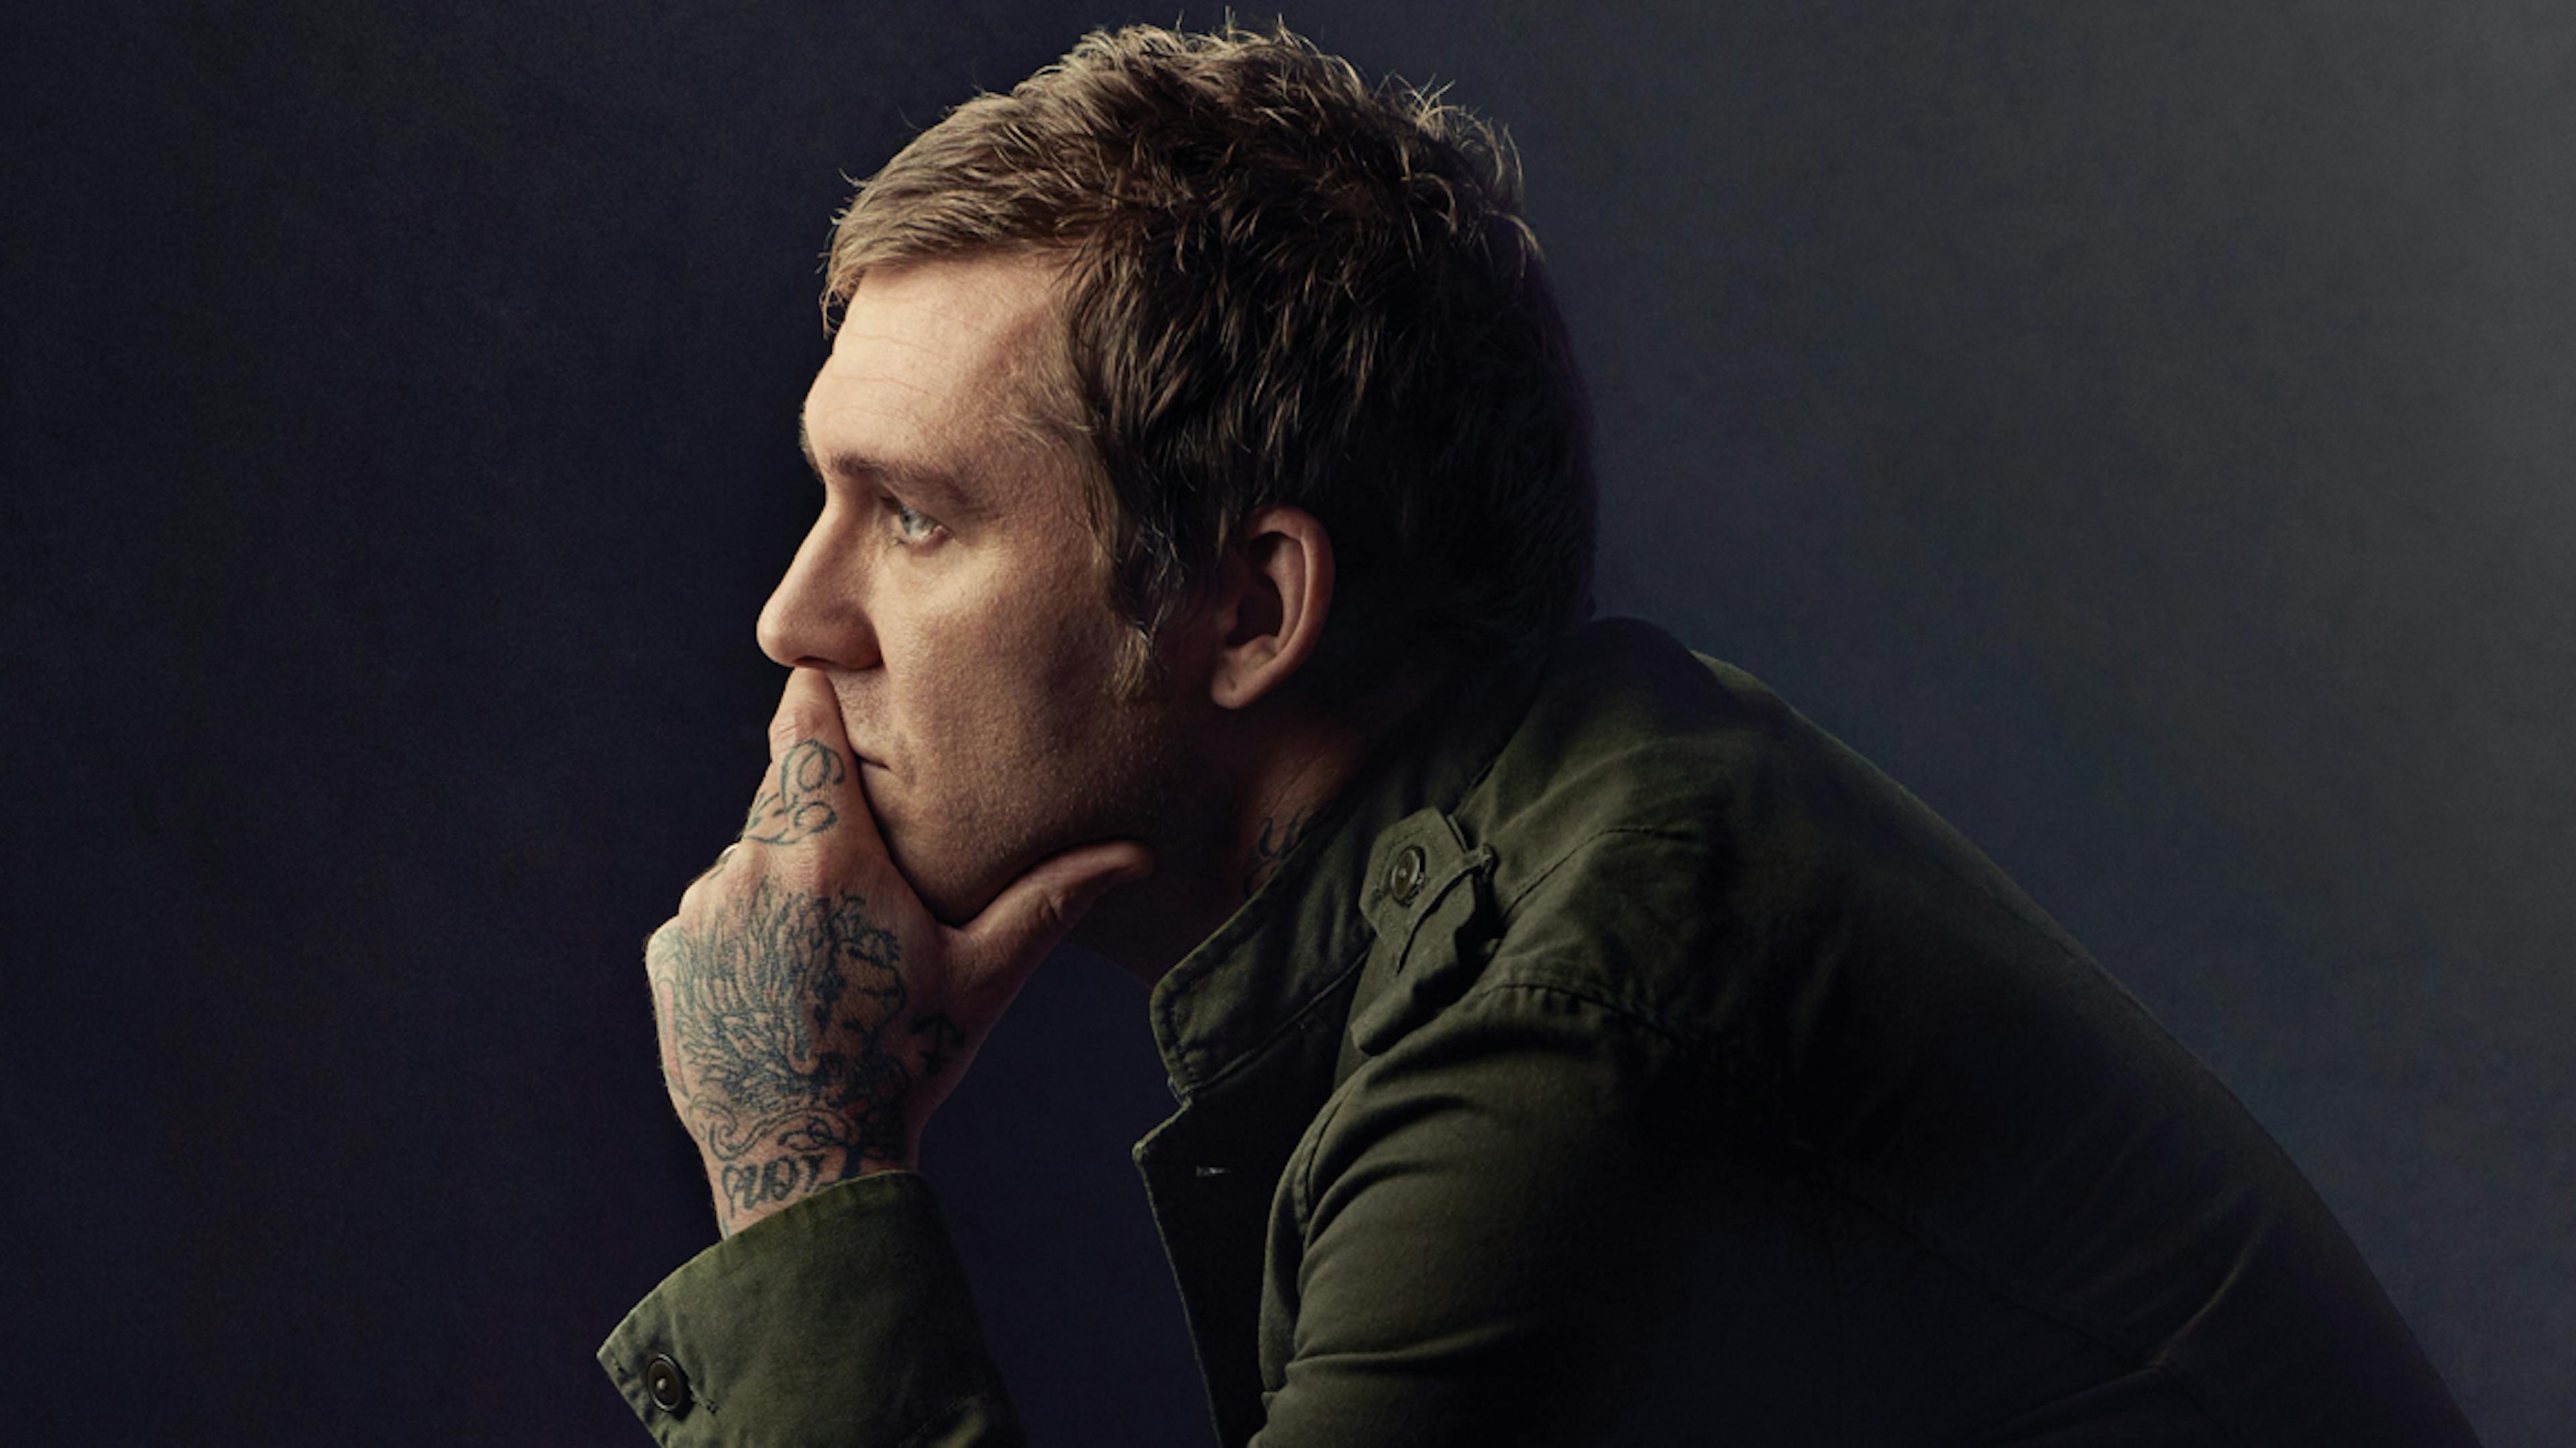 Brian Fallon Reveals The Songs That Inspired His Second Solo Album Sleepwalkers